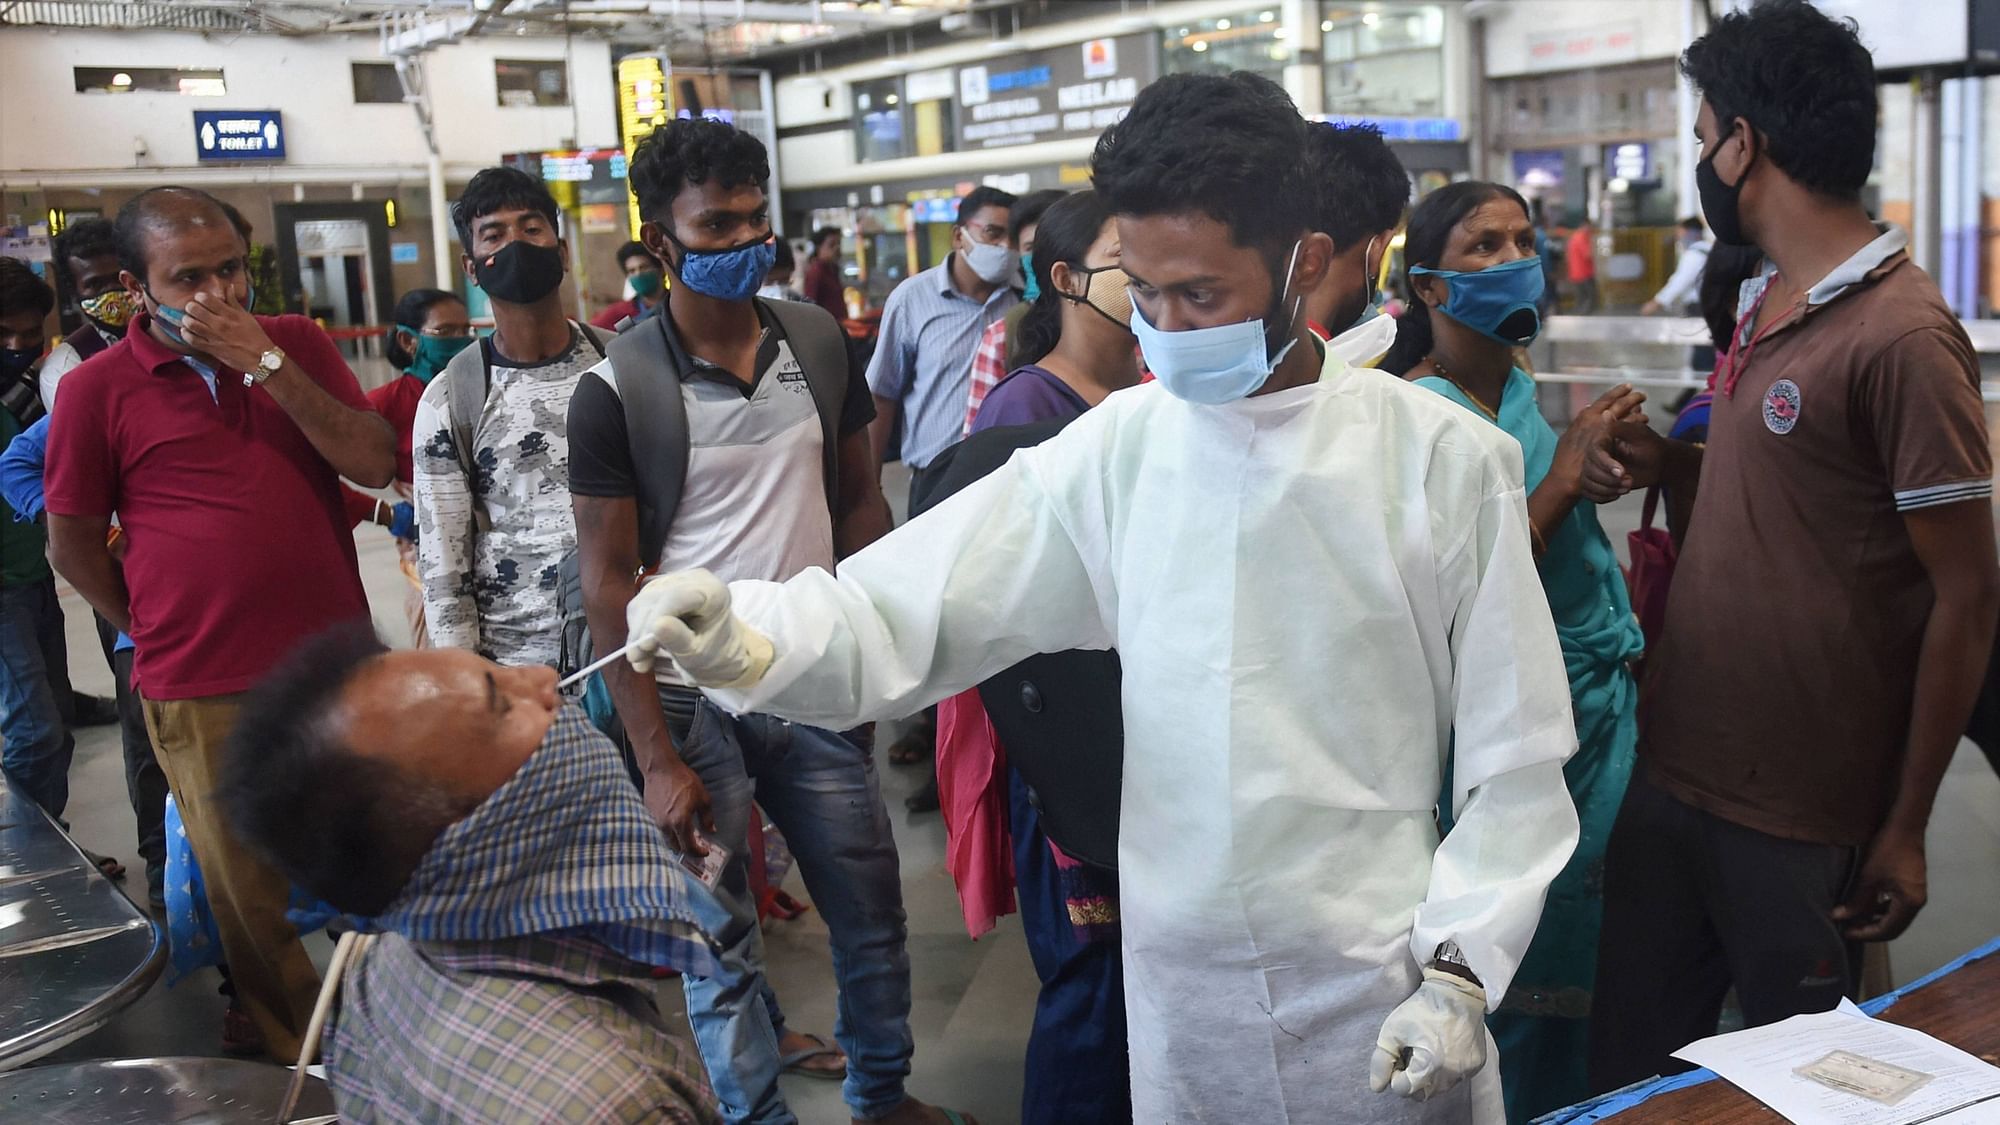 A health worker collects nasal sample from a passenger for COVID-19 test, at the Chhatrapati Shivaji Maharaj terminus in Mumbai.